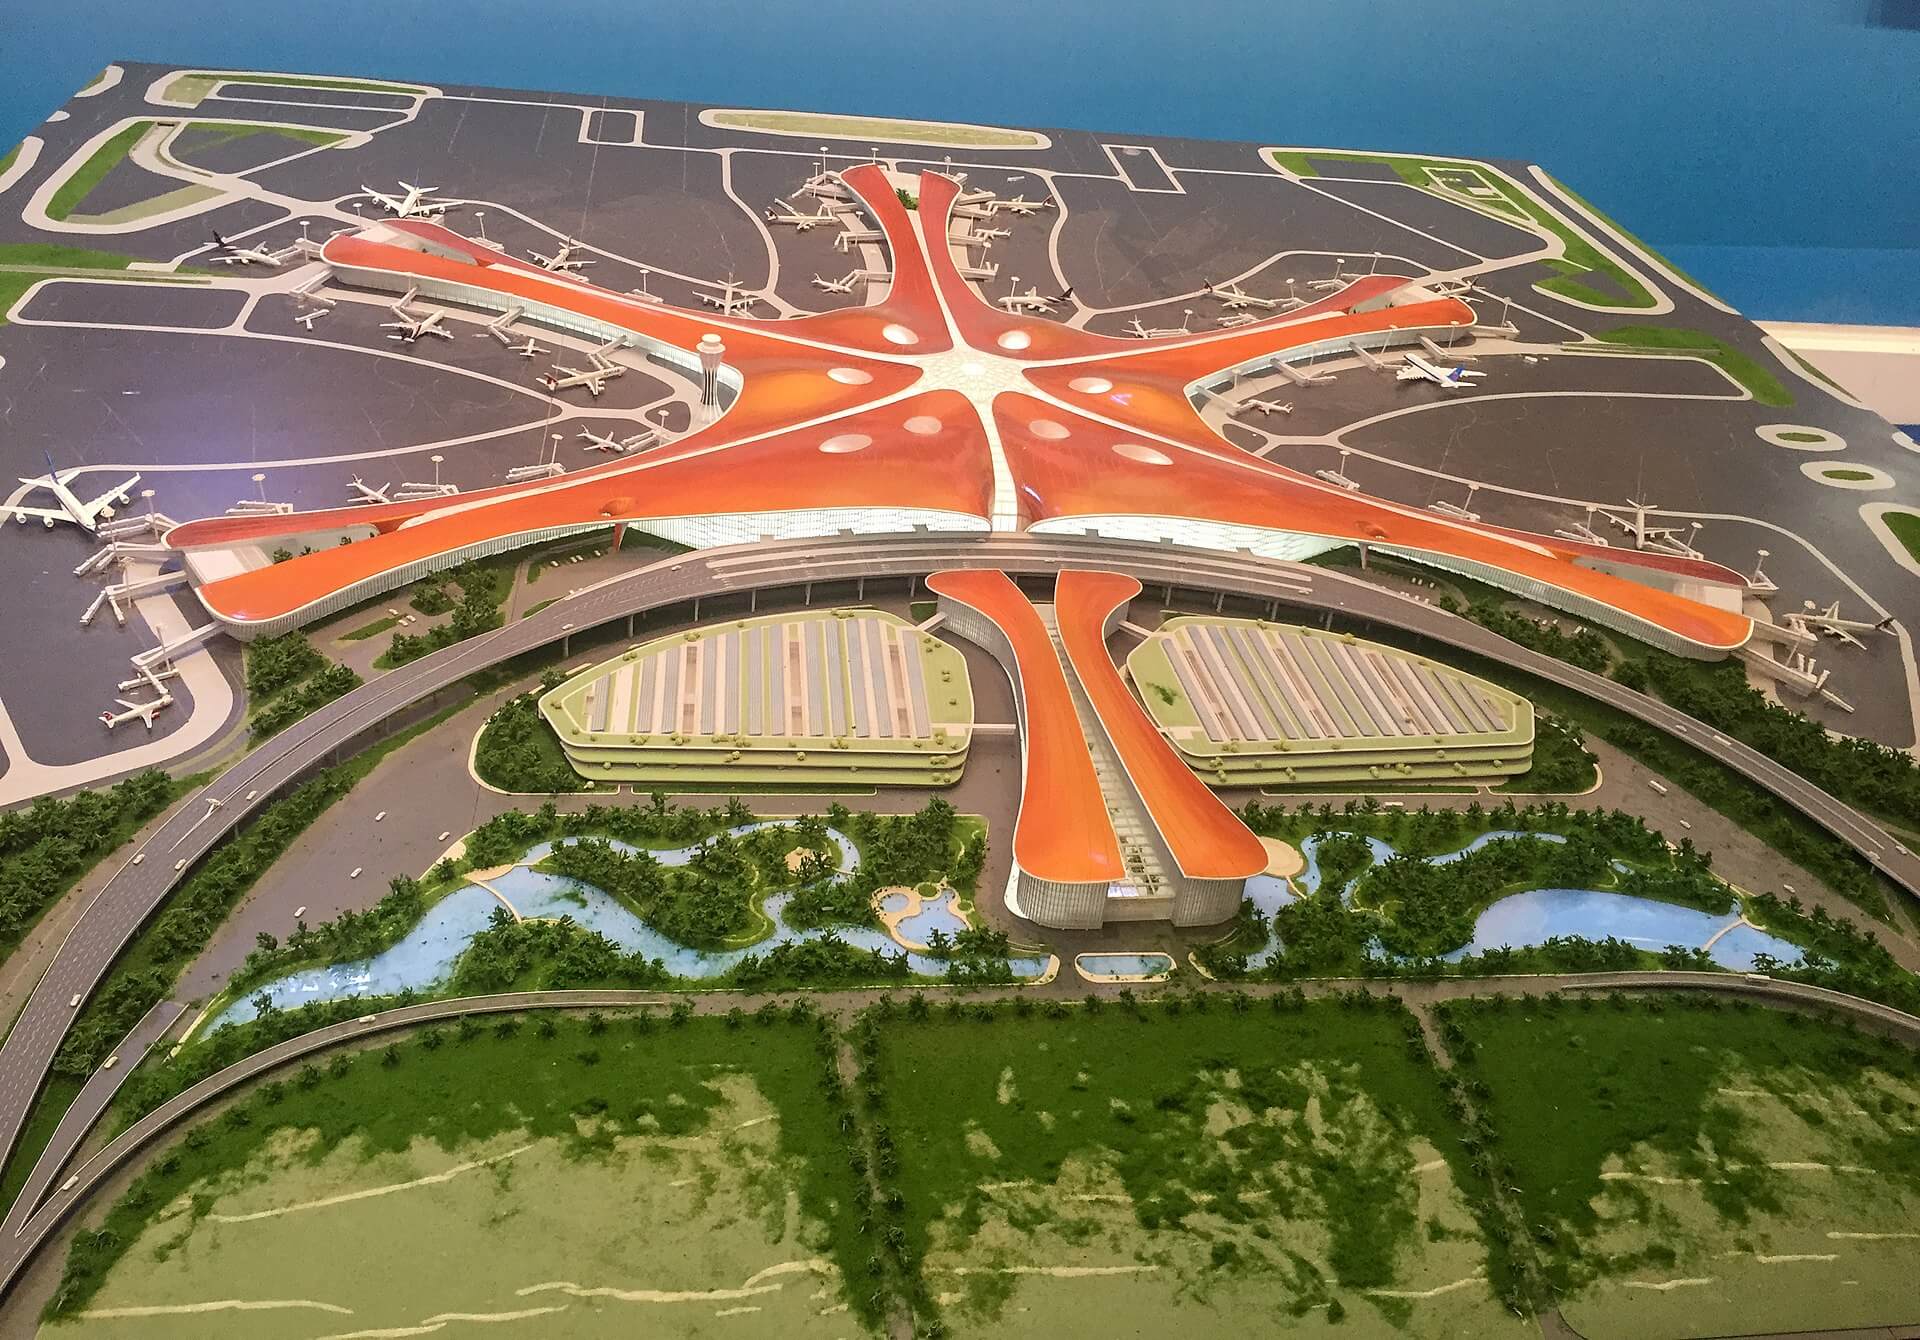 1920px-Model_of_Beijing_New_Airport_at_the_Five-Year_Achievements_Exhibition_20171015150600